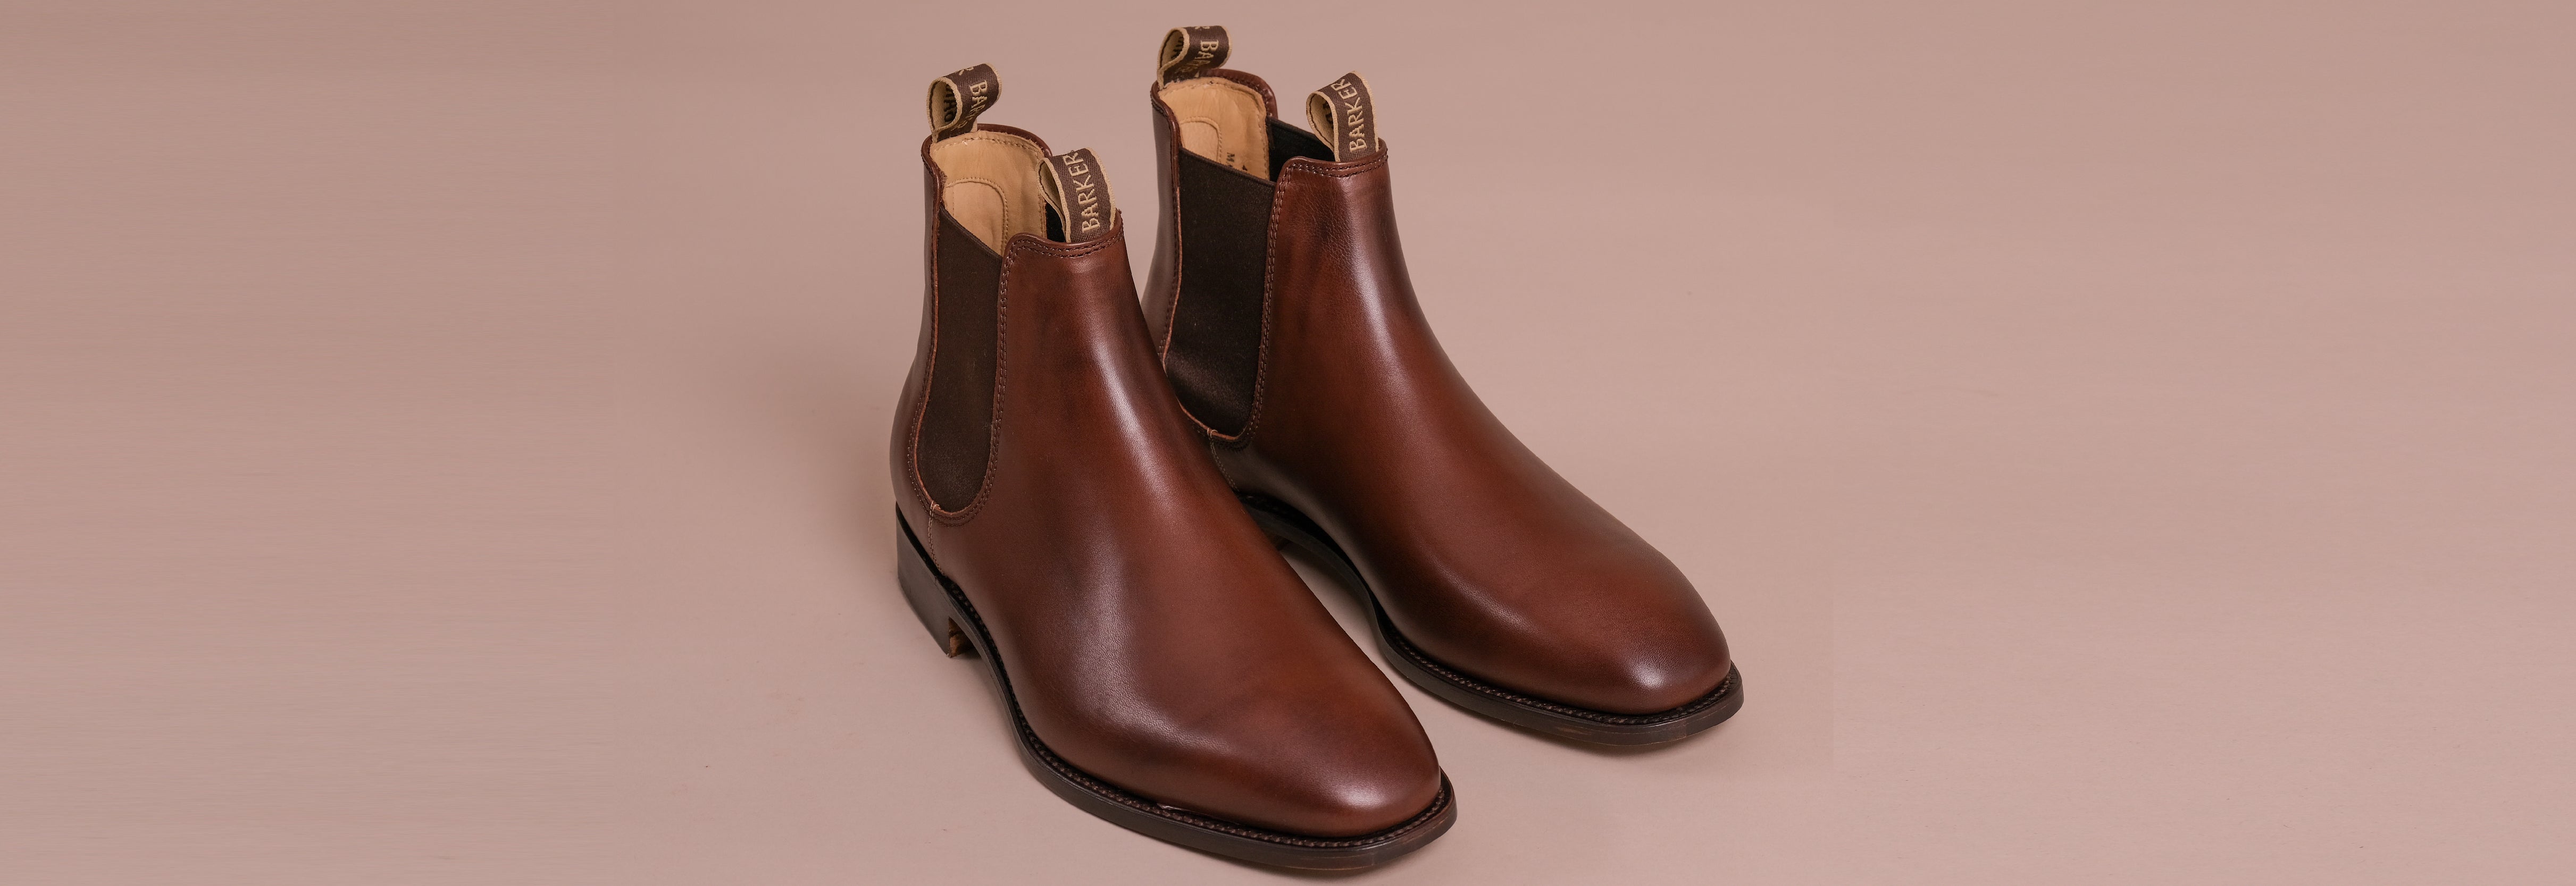 Professional Collection | Barker Shoes UK